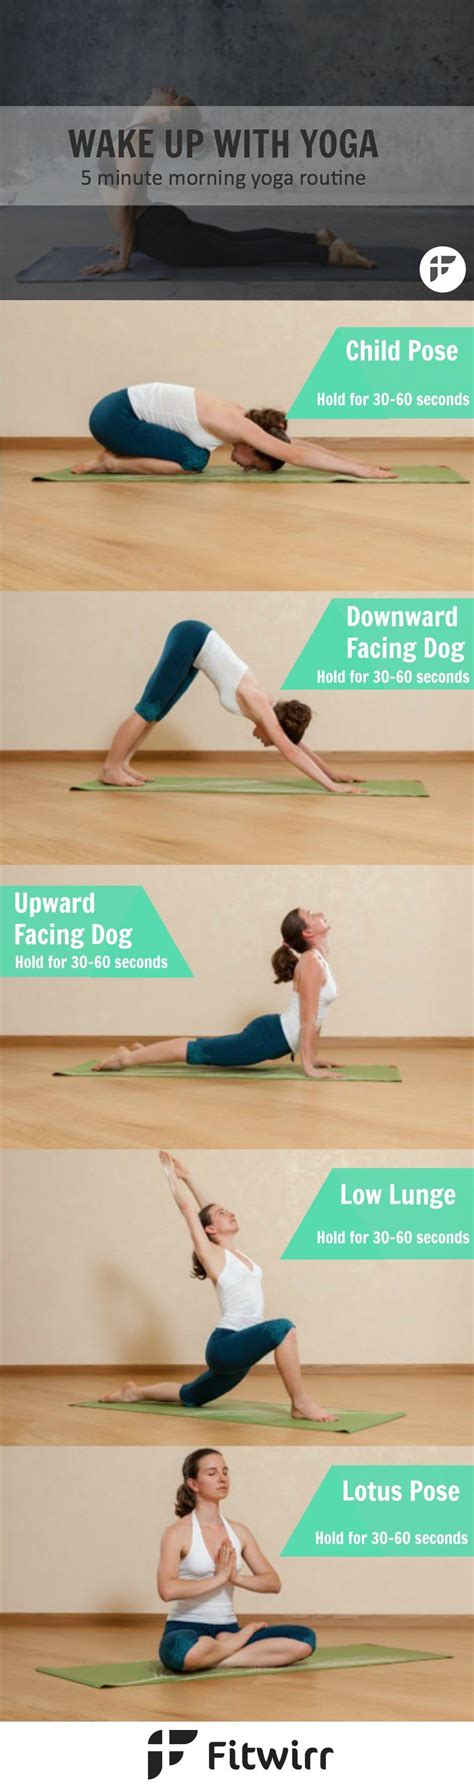 Wake Up With Yoga 5 Minute Morning Yoga Routine Pictures Photos And